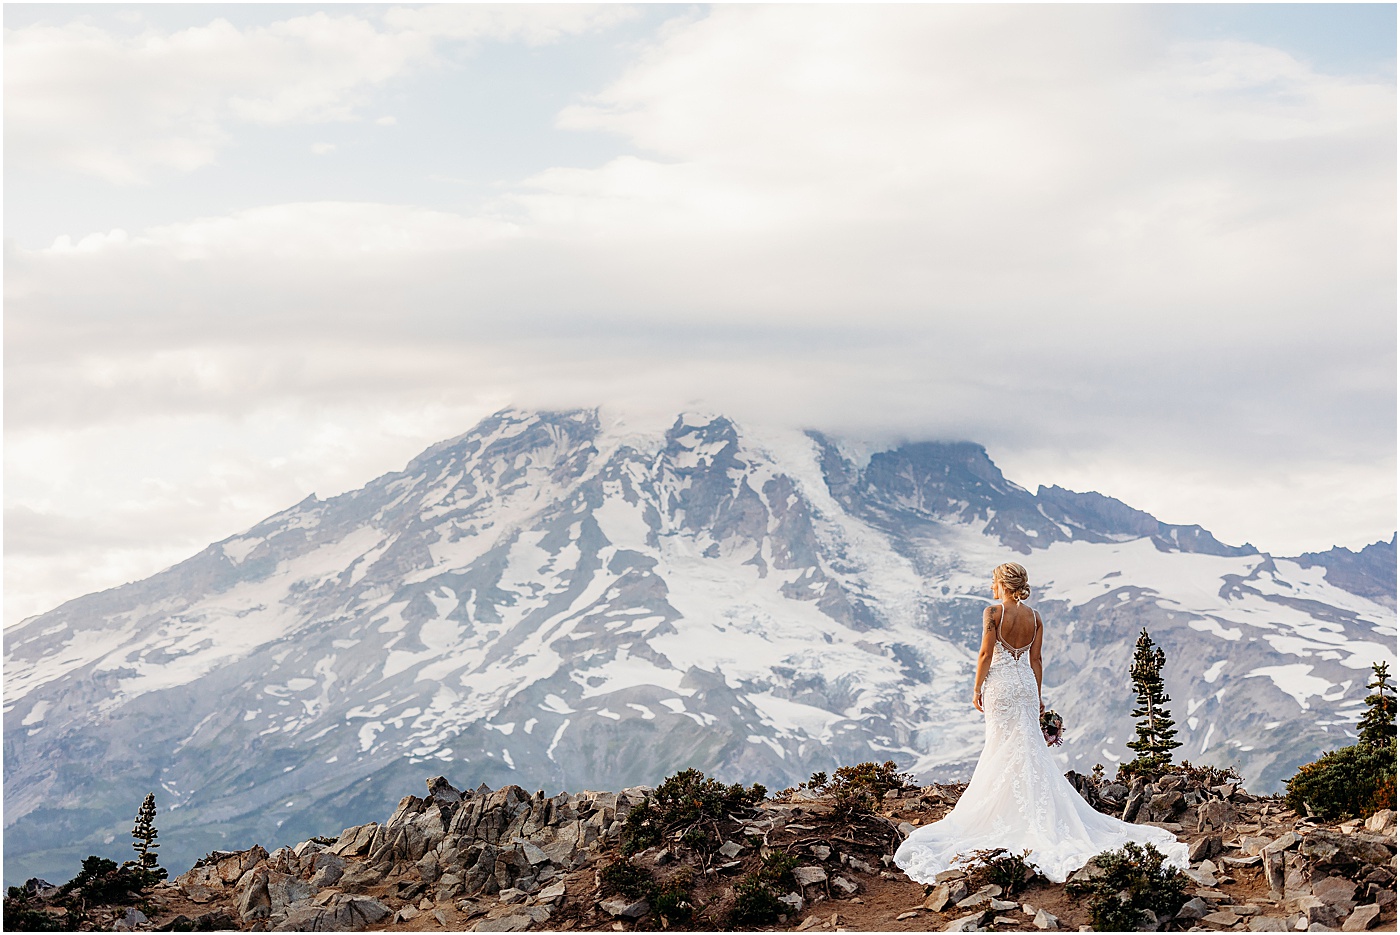 Bridal portraits with snowy Mt. Rainier in the background | Photo by Megan Montalvo Photography